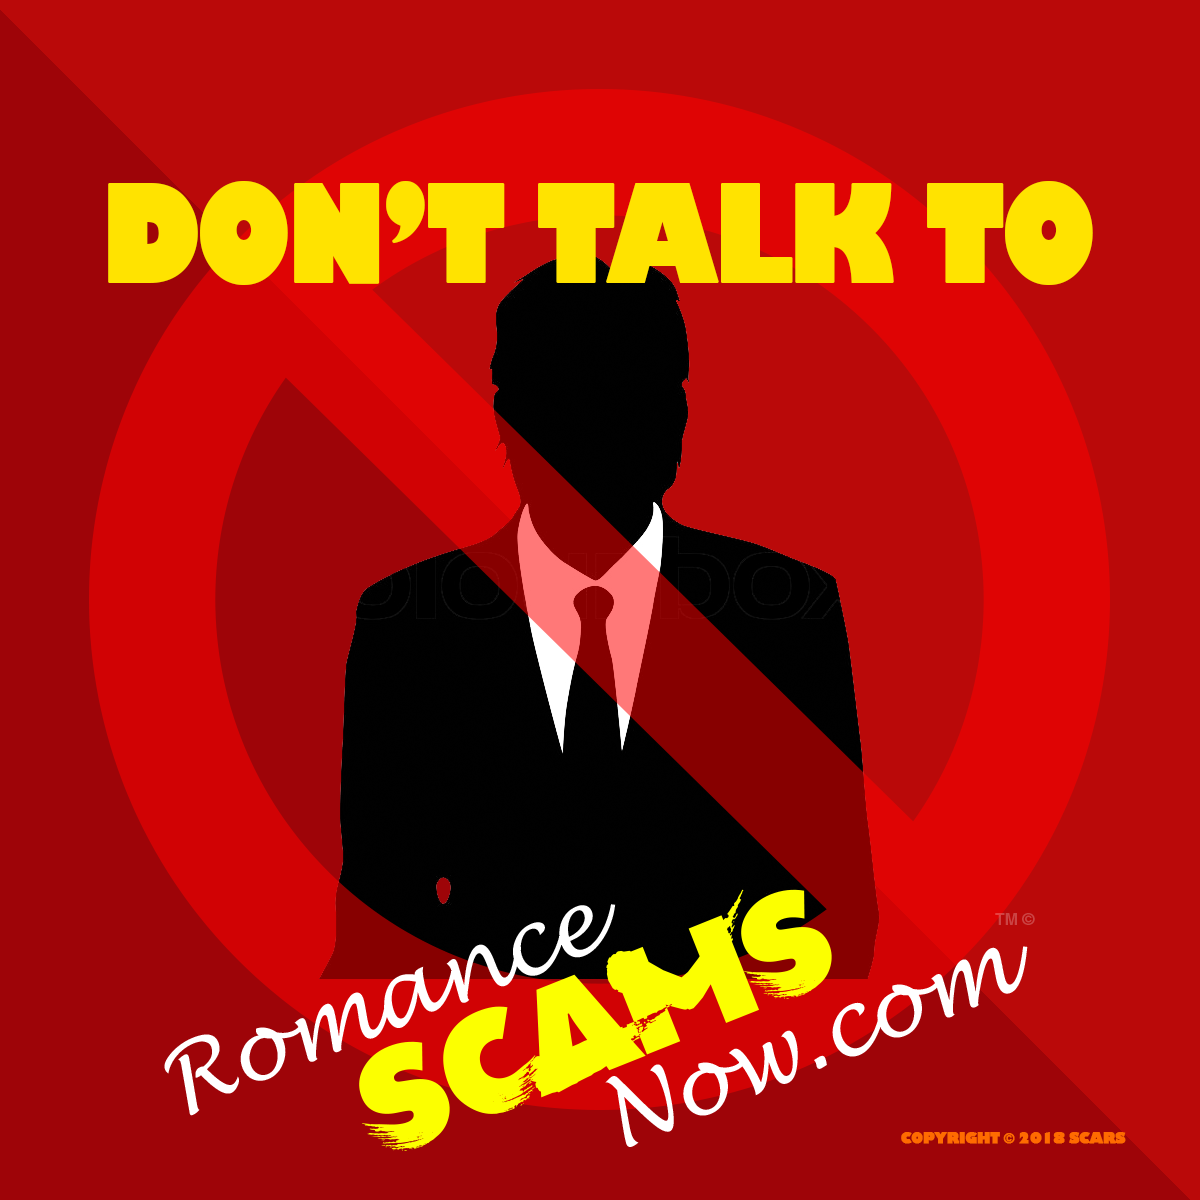 SCARS ™ / RSN™ Anti-Scam Poster 21